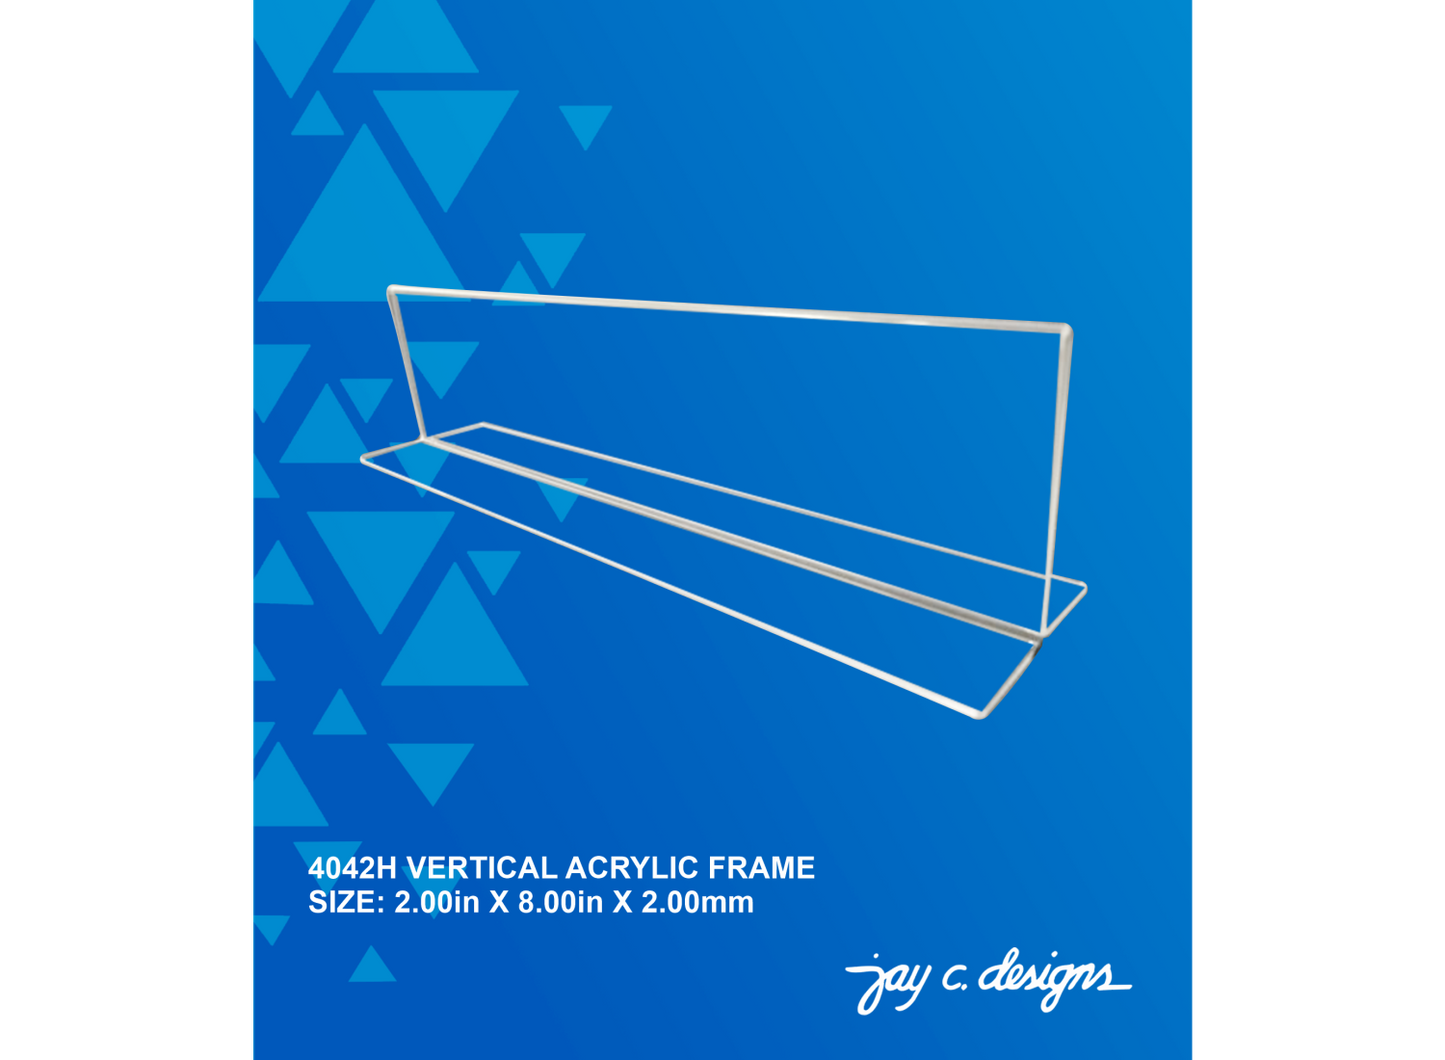 4042H Acrylic Vertical Frame (2.0in x 8.0in x 2.0mm)